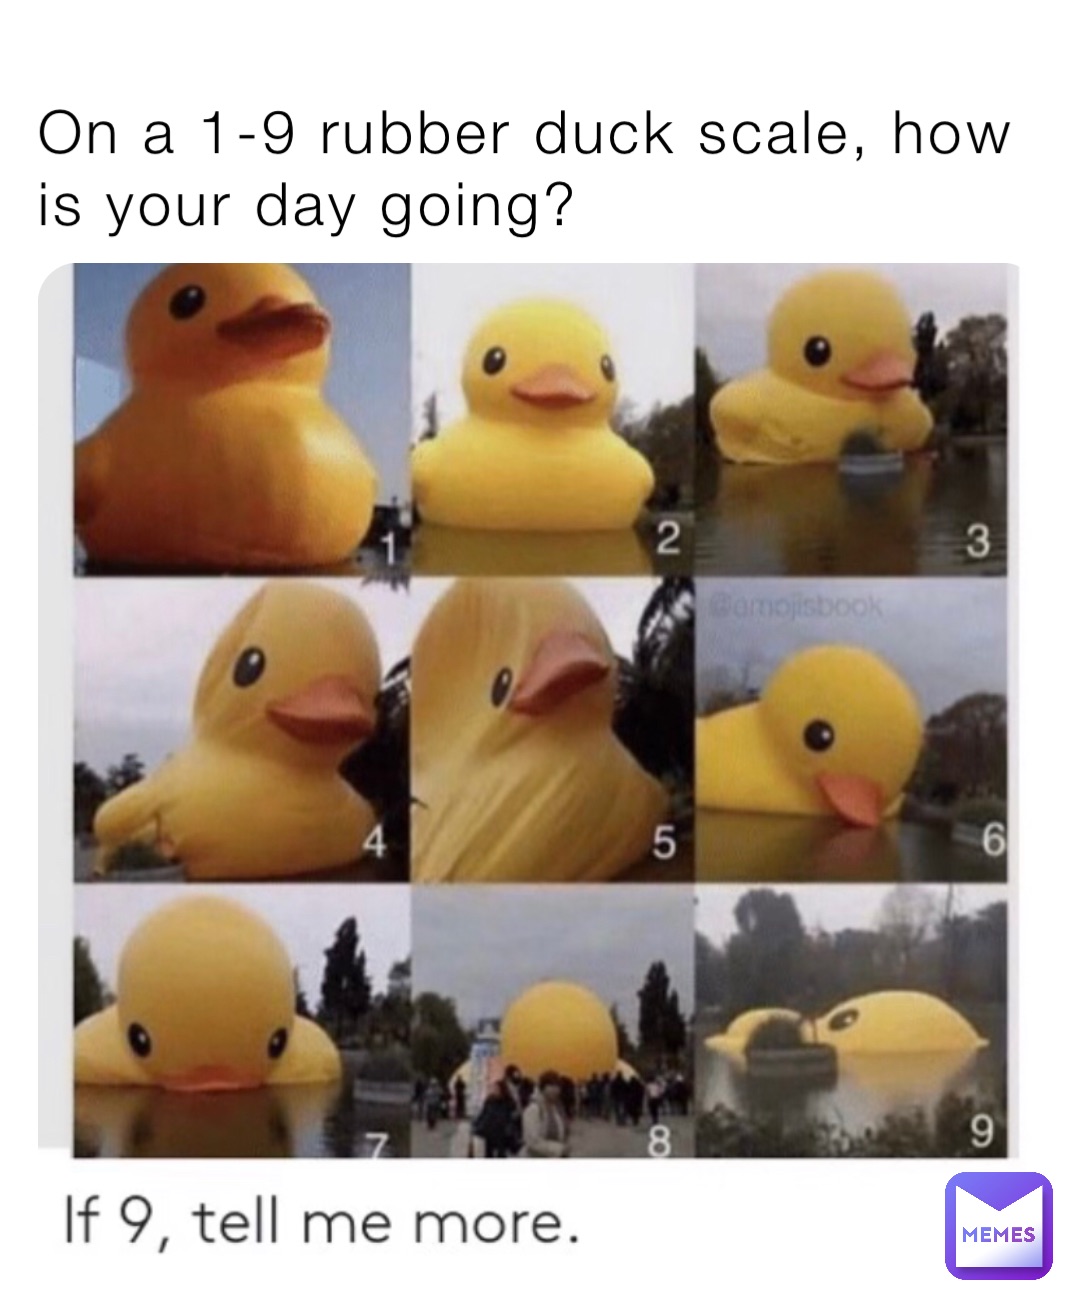 On a 1-9 rubber duck scale, how is your day going?